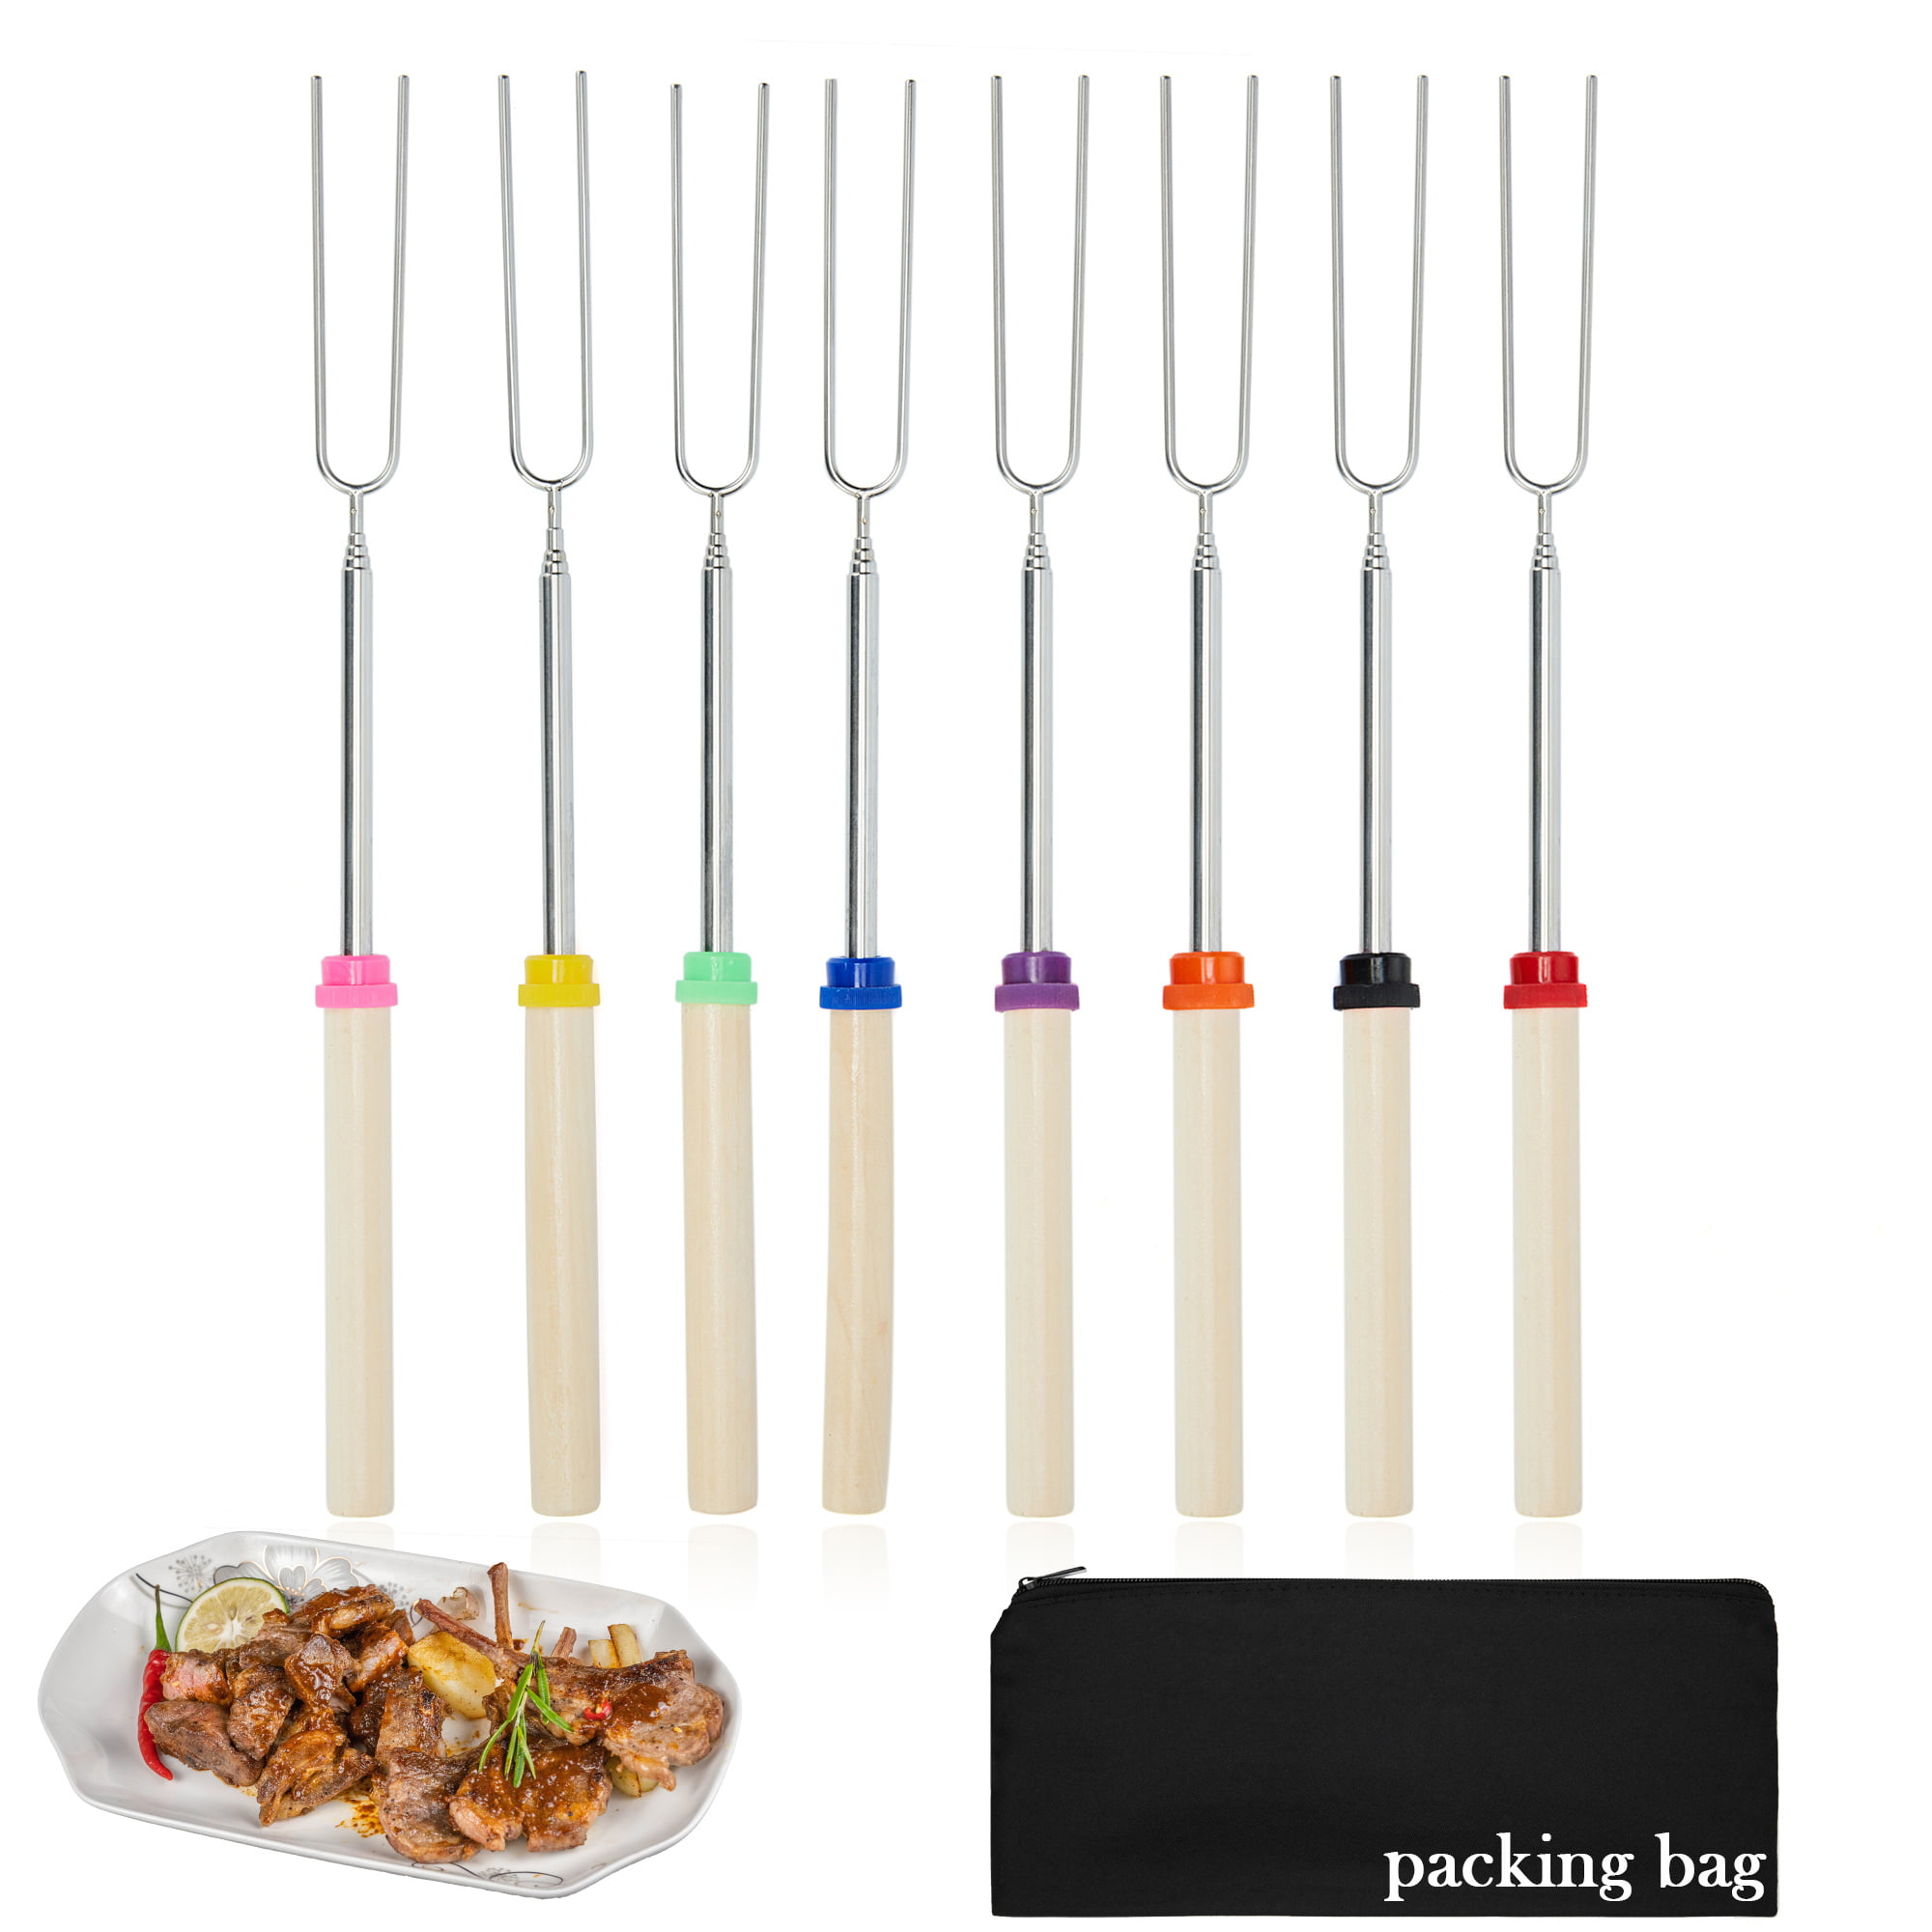 8pc 32 BBQ Barbecue Forks Marshmallow Roasting Sticks Telescoping Skewers USA 